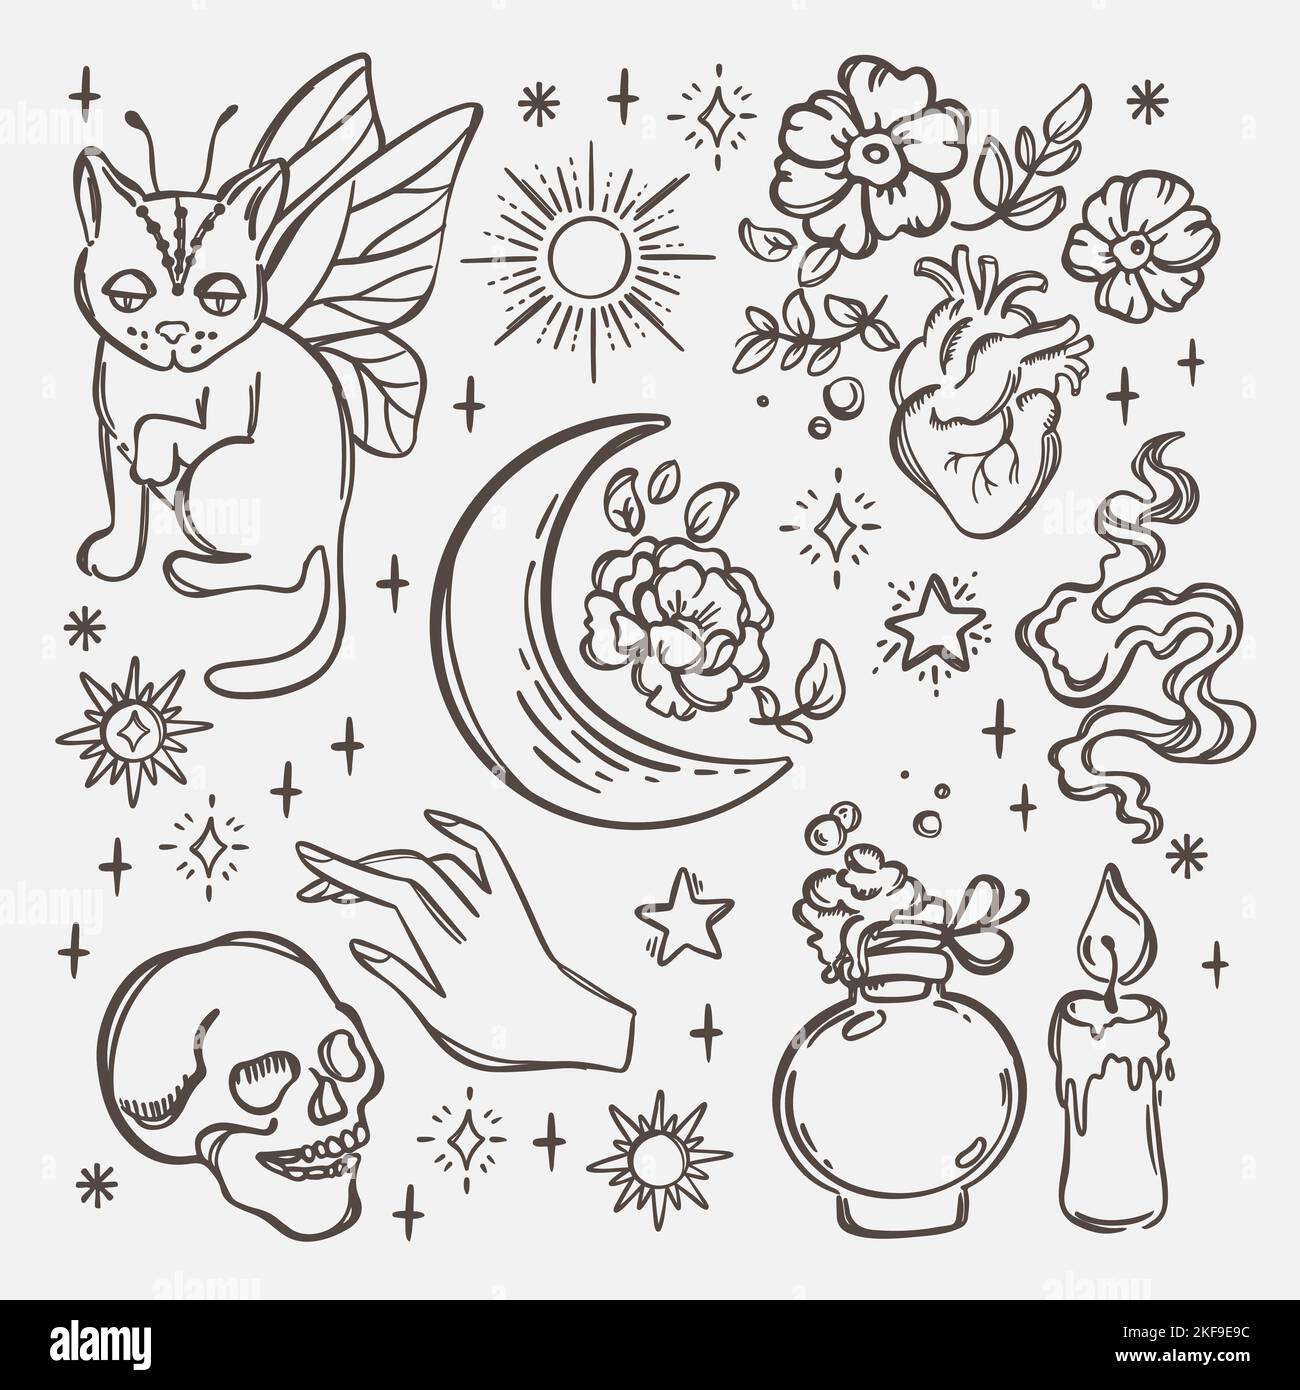 ASTROLOGICAL SYMBOLS Monochrome Hand Drawn Objects Sketch Alchemic Astrologic And Occult Celestial Collection Magical Accessories Cartoon Vector Illus Stock Vector